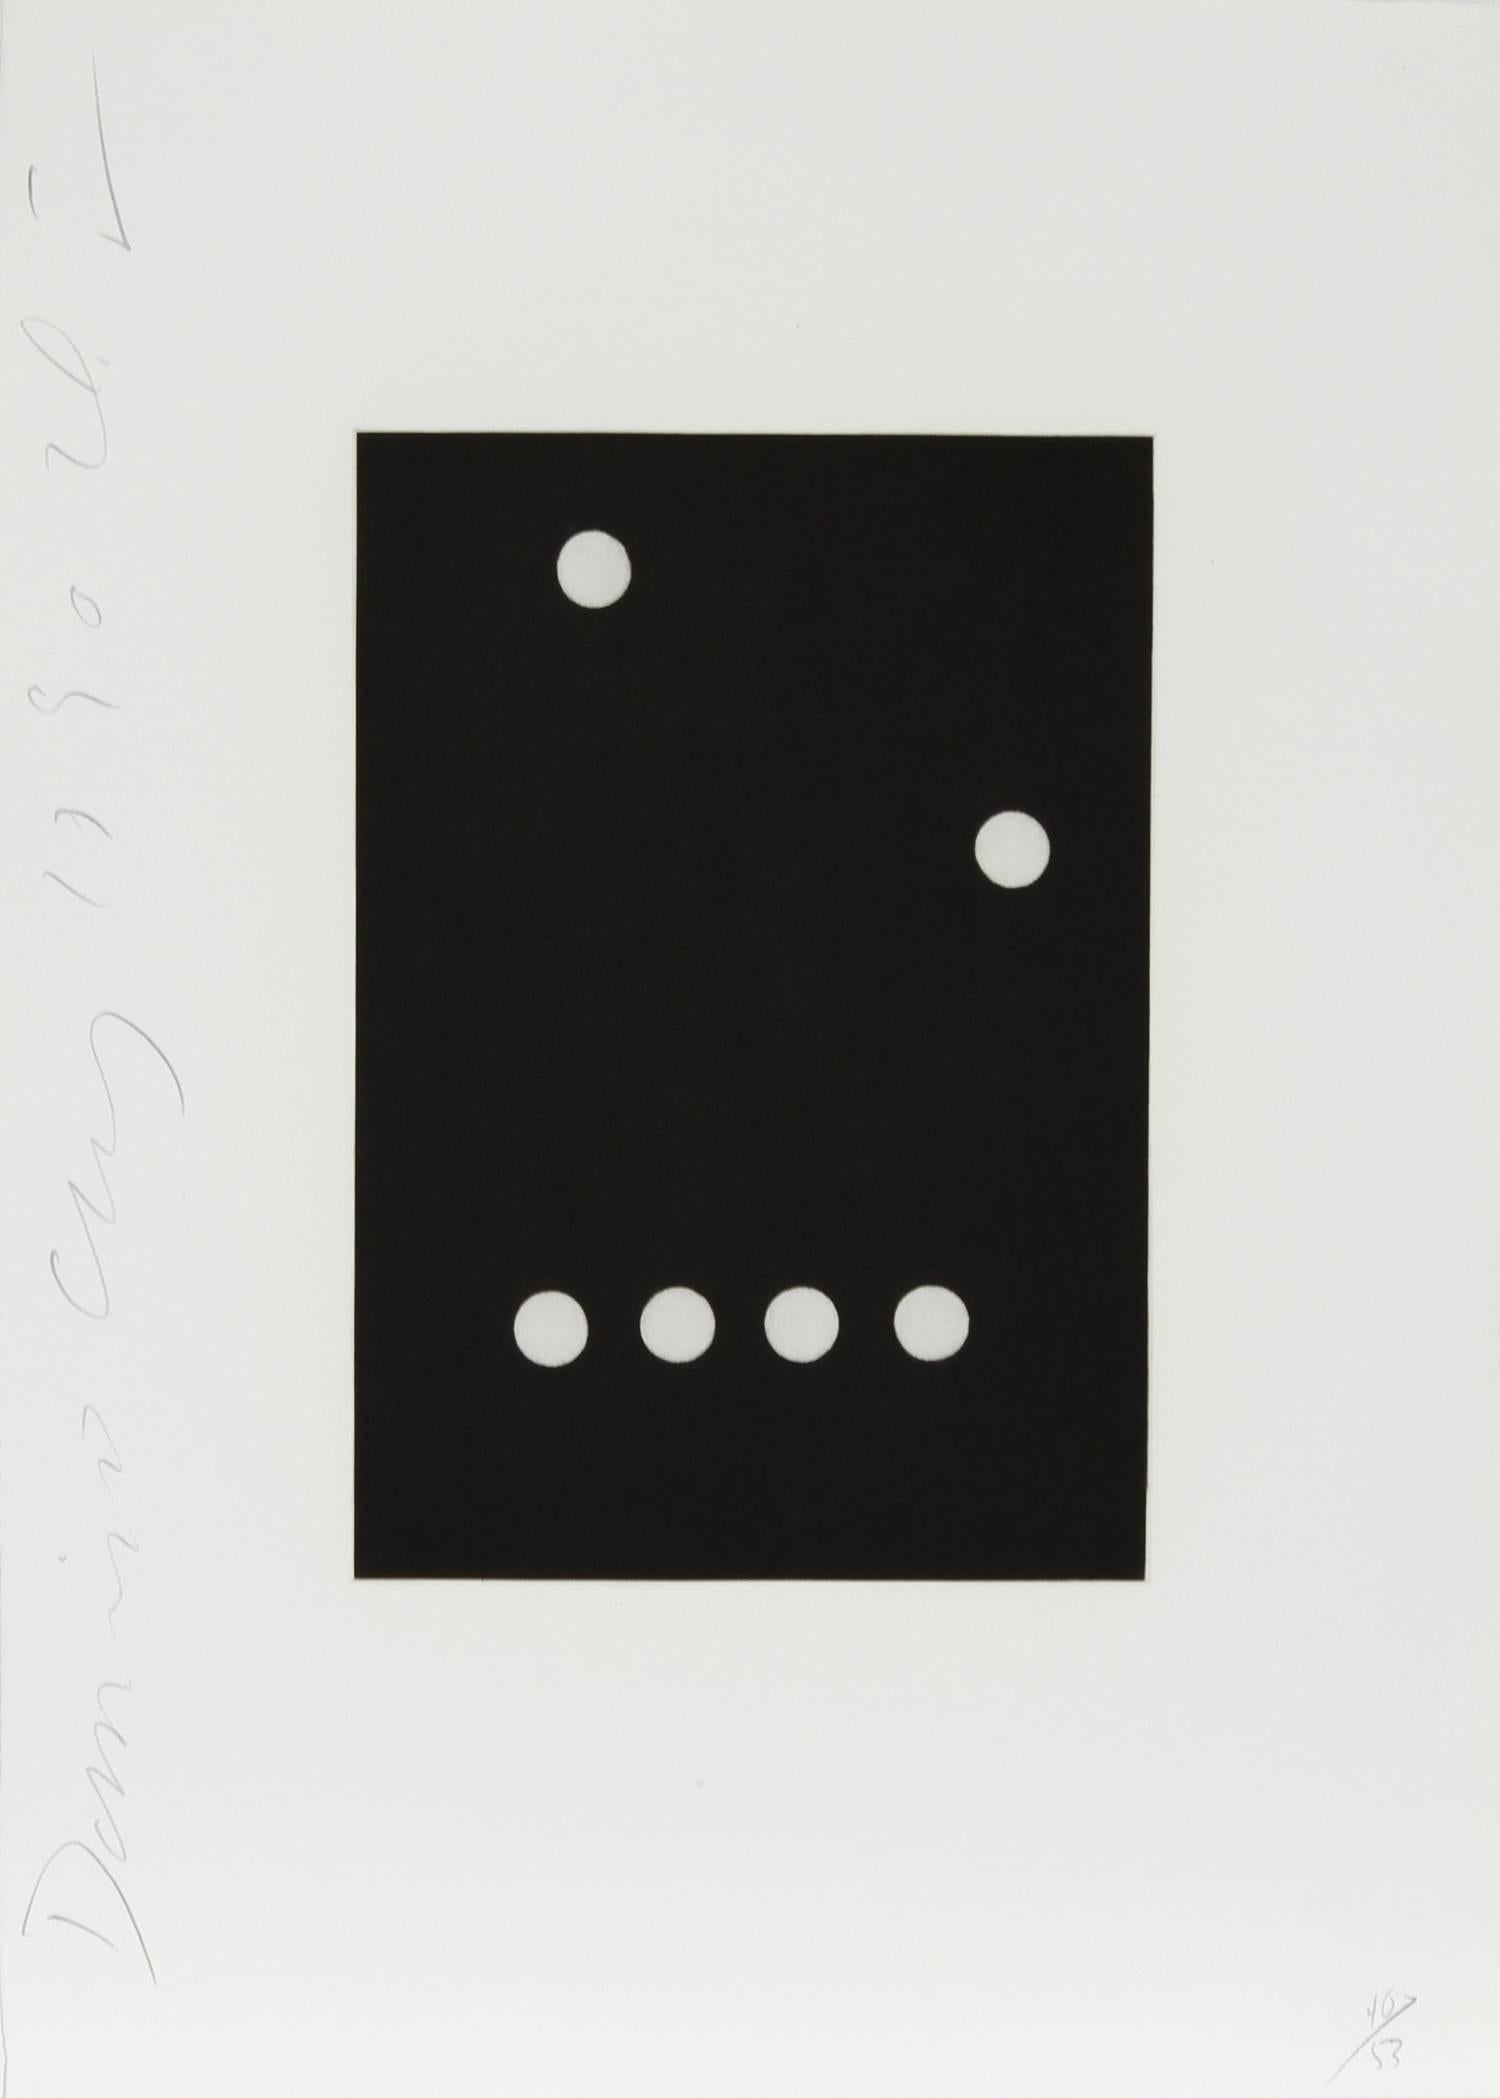 Donald Sultan Abstract Print - 13 from the Dominoes Portfolio, Aquatint Etching, 1990